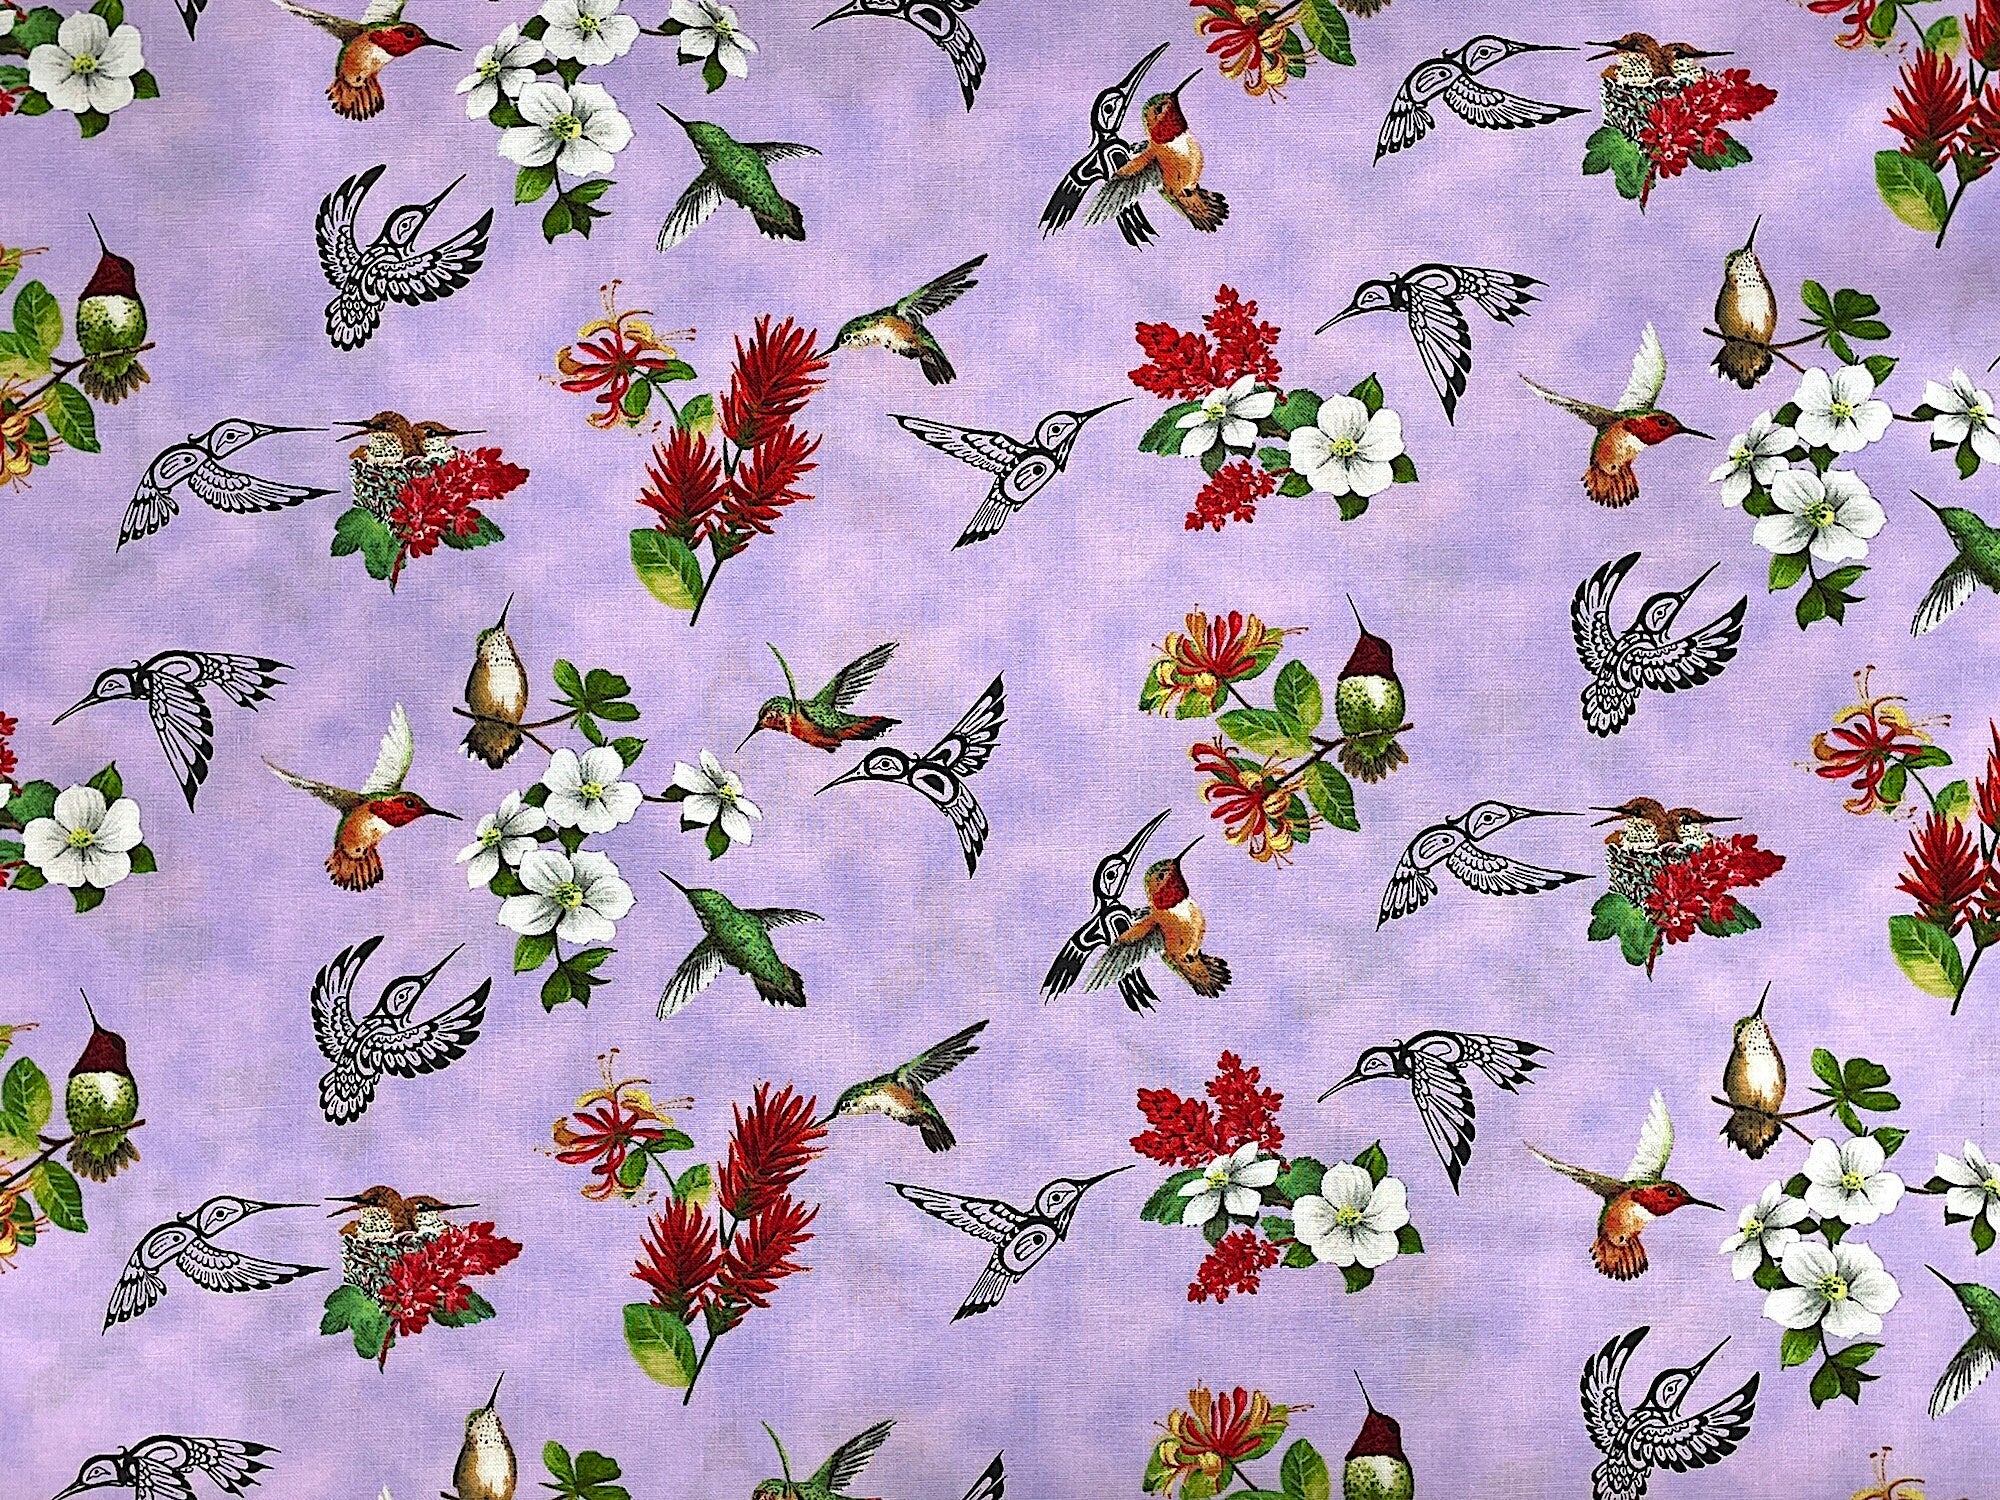 Lavender cotton fabric covered with hummingbirds and flowers.